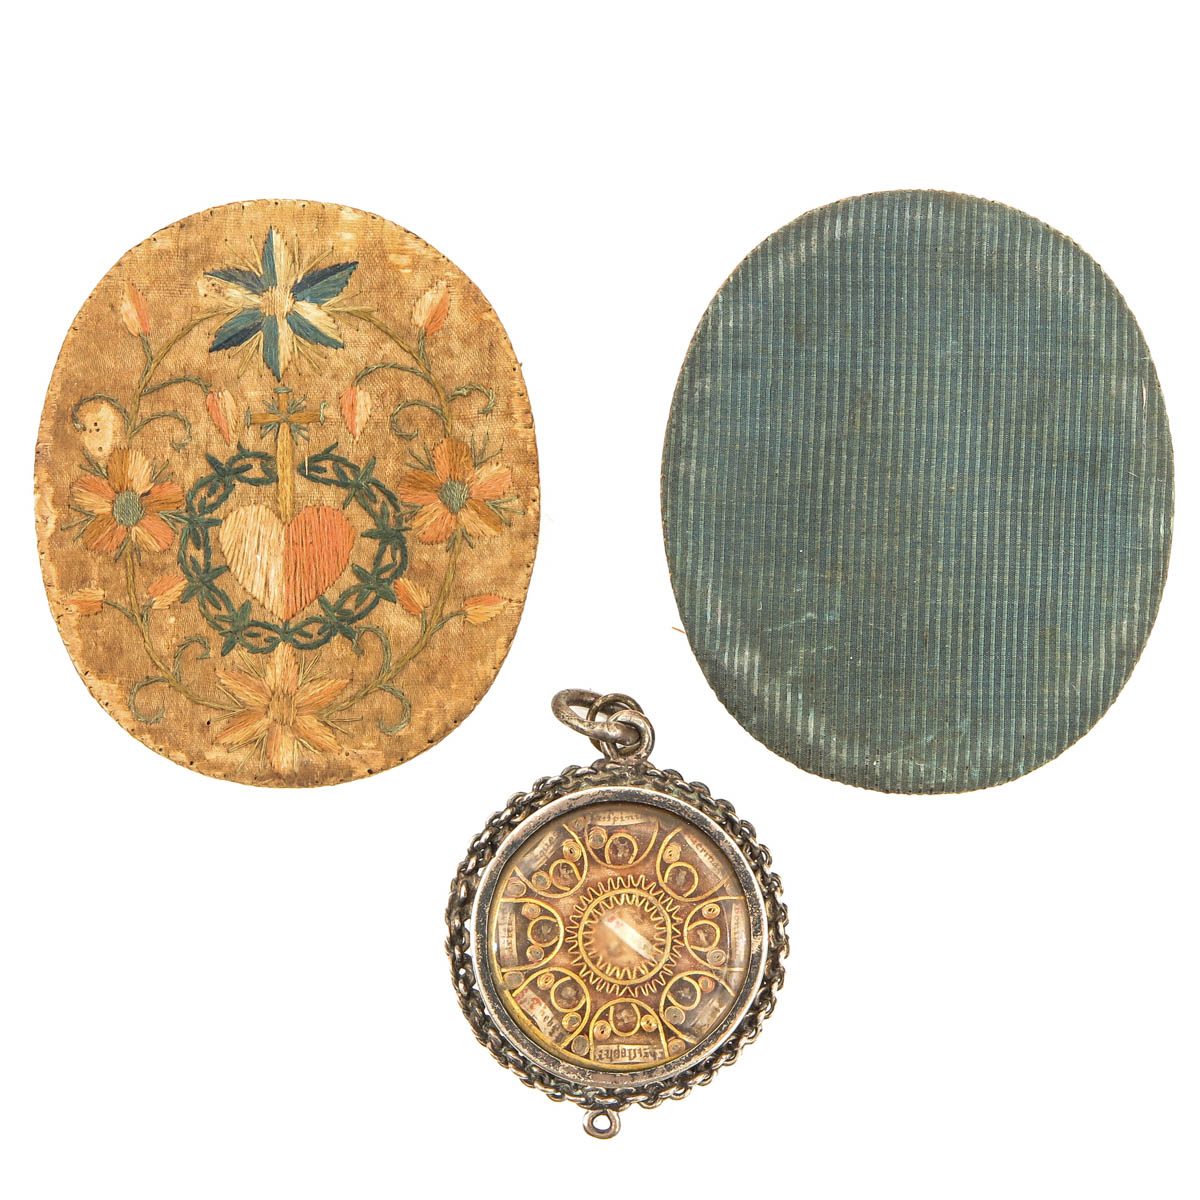 A Lot of 2 Reliquaries - Image 2 of 7